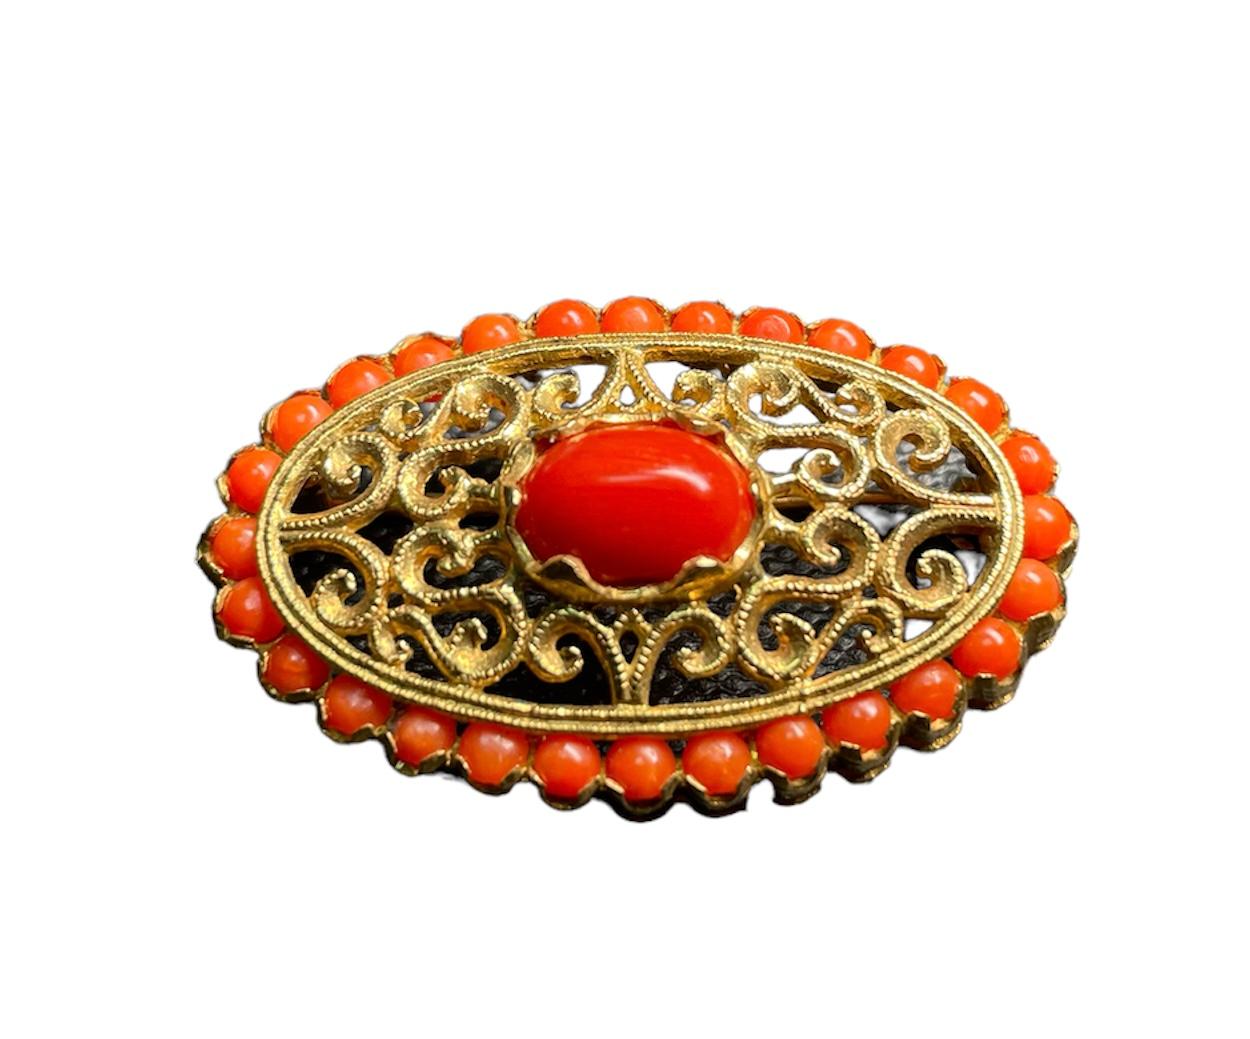 This is an 18k yellow gold and Mediterranean coral brooch. It depicts an elongated oval brooch with a cabochon oval coral in the center in prong setting. Around it, the brooch is adorned with filigree like scrolls. Coral beads over a gold base